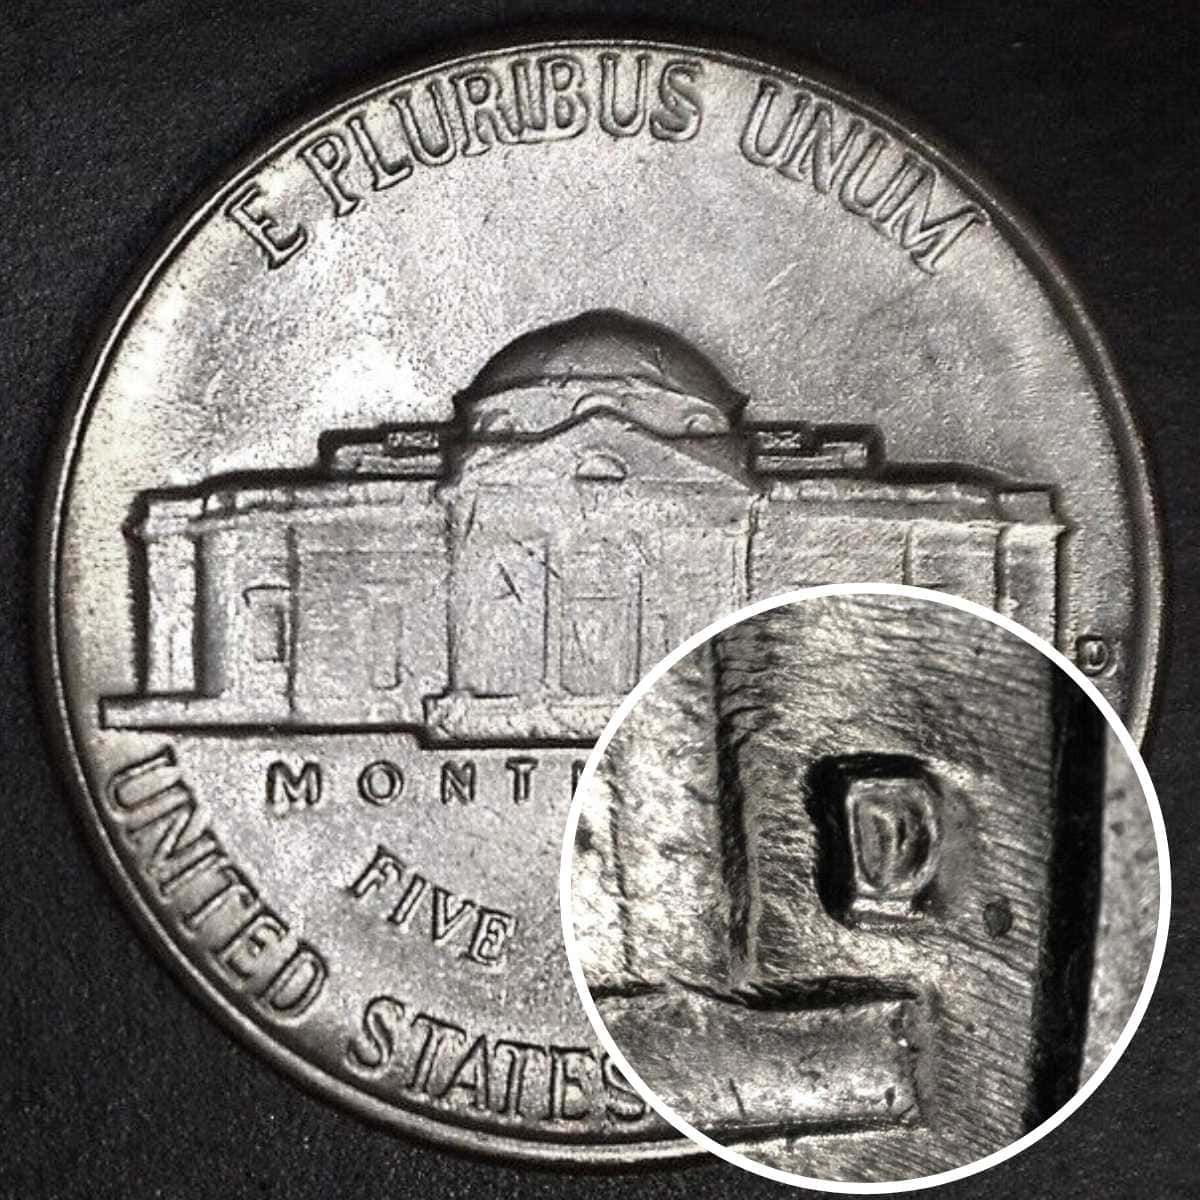 1963-DD Nickel with Repunched Mint Mark (RPM)